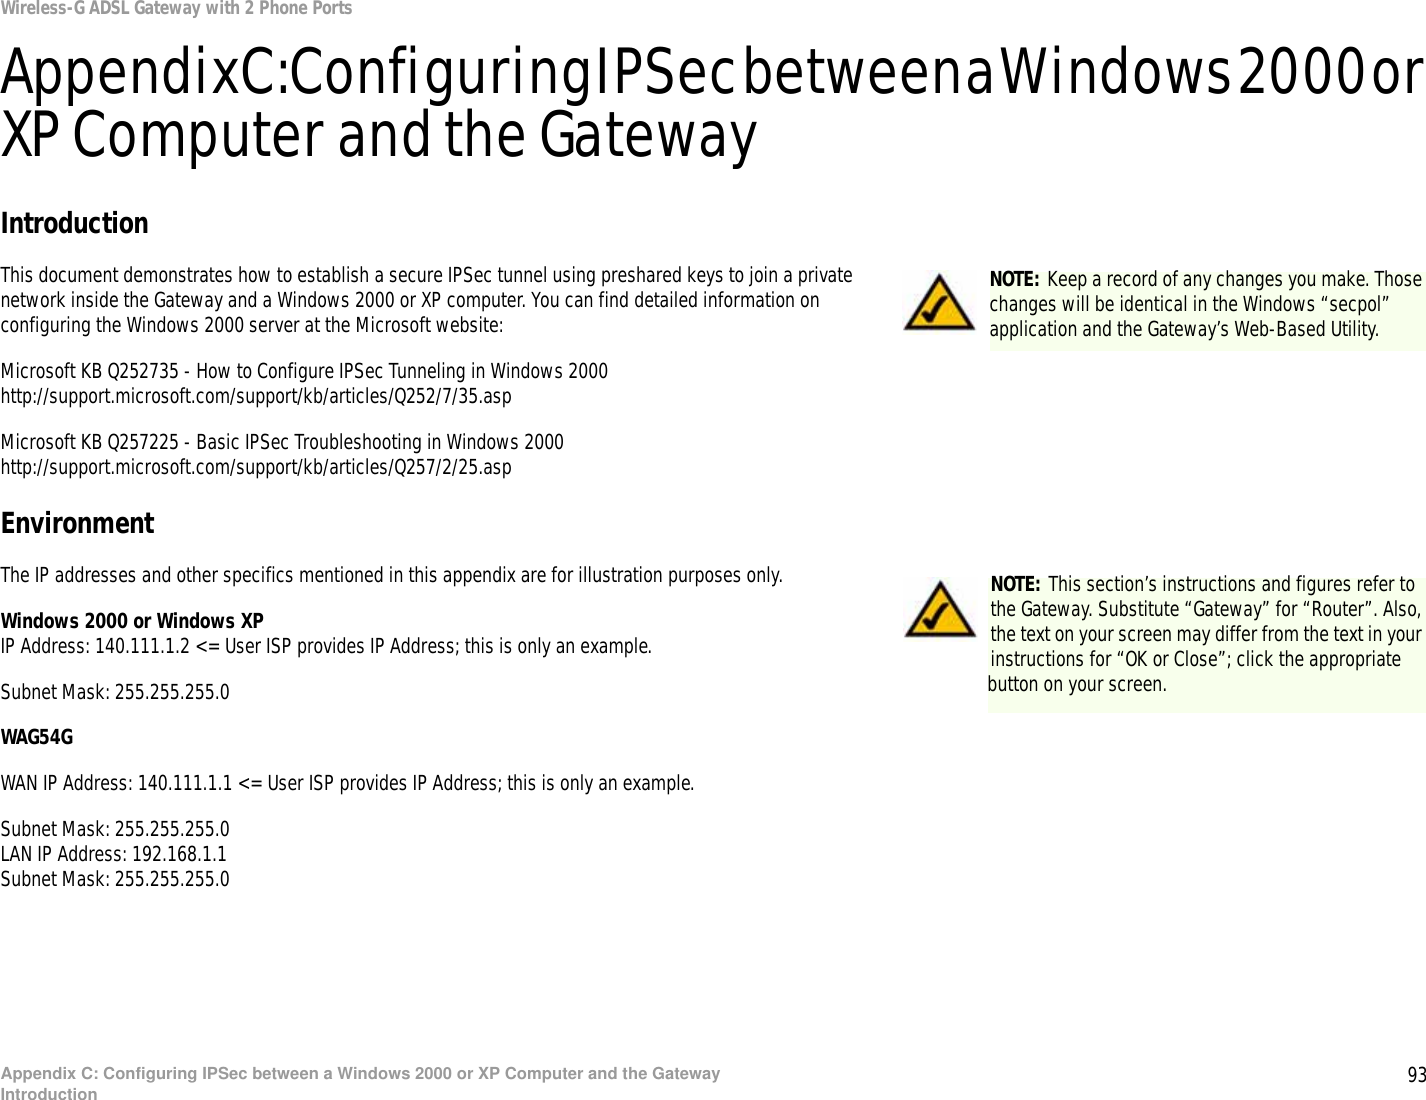 93Appendix C: Configuring IPSec between a Windows 2000 or XP Computer and the GatewayIntroductionWireless-G ADSL Gateway with 2 Phone PortsAppendix C: Configuring IPSec between a Windows 2000 or XP Computer and the GatewayIntroductionThis document demonstrates how to establish a secure IPSec tunnel using preshared keys to join a private network inside the Gateway and a Windows 2000 or XP computer. You can find detailed information on configuring the Windows 2000 server at the Microsoft website: Microsoft KB Q252735 - How to Configure IPSec Tunneling in Windows 2000http://support.microsoft.com/support/kb/articles/Q252/7/35.aspMicrosoft KB Q257225 - Basic IPSec Troubleshooting in Windows 2000http://support.microsoft.com/support/kb/articles/Q257/2/25.aspEnvironmentThe IP addresses and other specifics mentioned in this appendix are for illustration purposes only.Windows 2000 or Windows XPIP Address: 140.111.1.2 &lt;= User ISP provides IP Address; this is only an example.Subnet Mask: 255.255.255.0WAG54GWAN IP Address: 140.111.1.1 &lt;= User ISP provides IP Address; this is only an example.Subnet Mask: 255.255.255.0LAN IP Address: 192.168.1.1Subnet Mask: 255.255.255.0NOTE: Keep a record of any changes you make. Those changes will be identical in the Windows “secpol” application and the Gateway’s Web-Based Utility.NOTE: This section’s instructions and figures refer to the Gateway. Substitute “Gateway” for “Router”. Also, the text on your screen may differ from the text in your instructions for “OK or Close”; click the appropriate button on your screen.